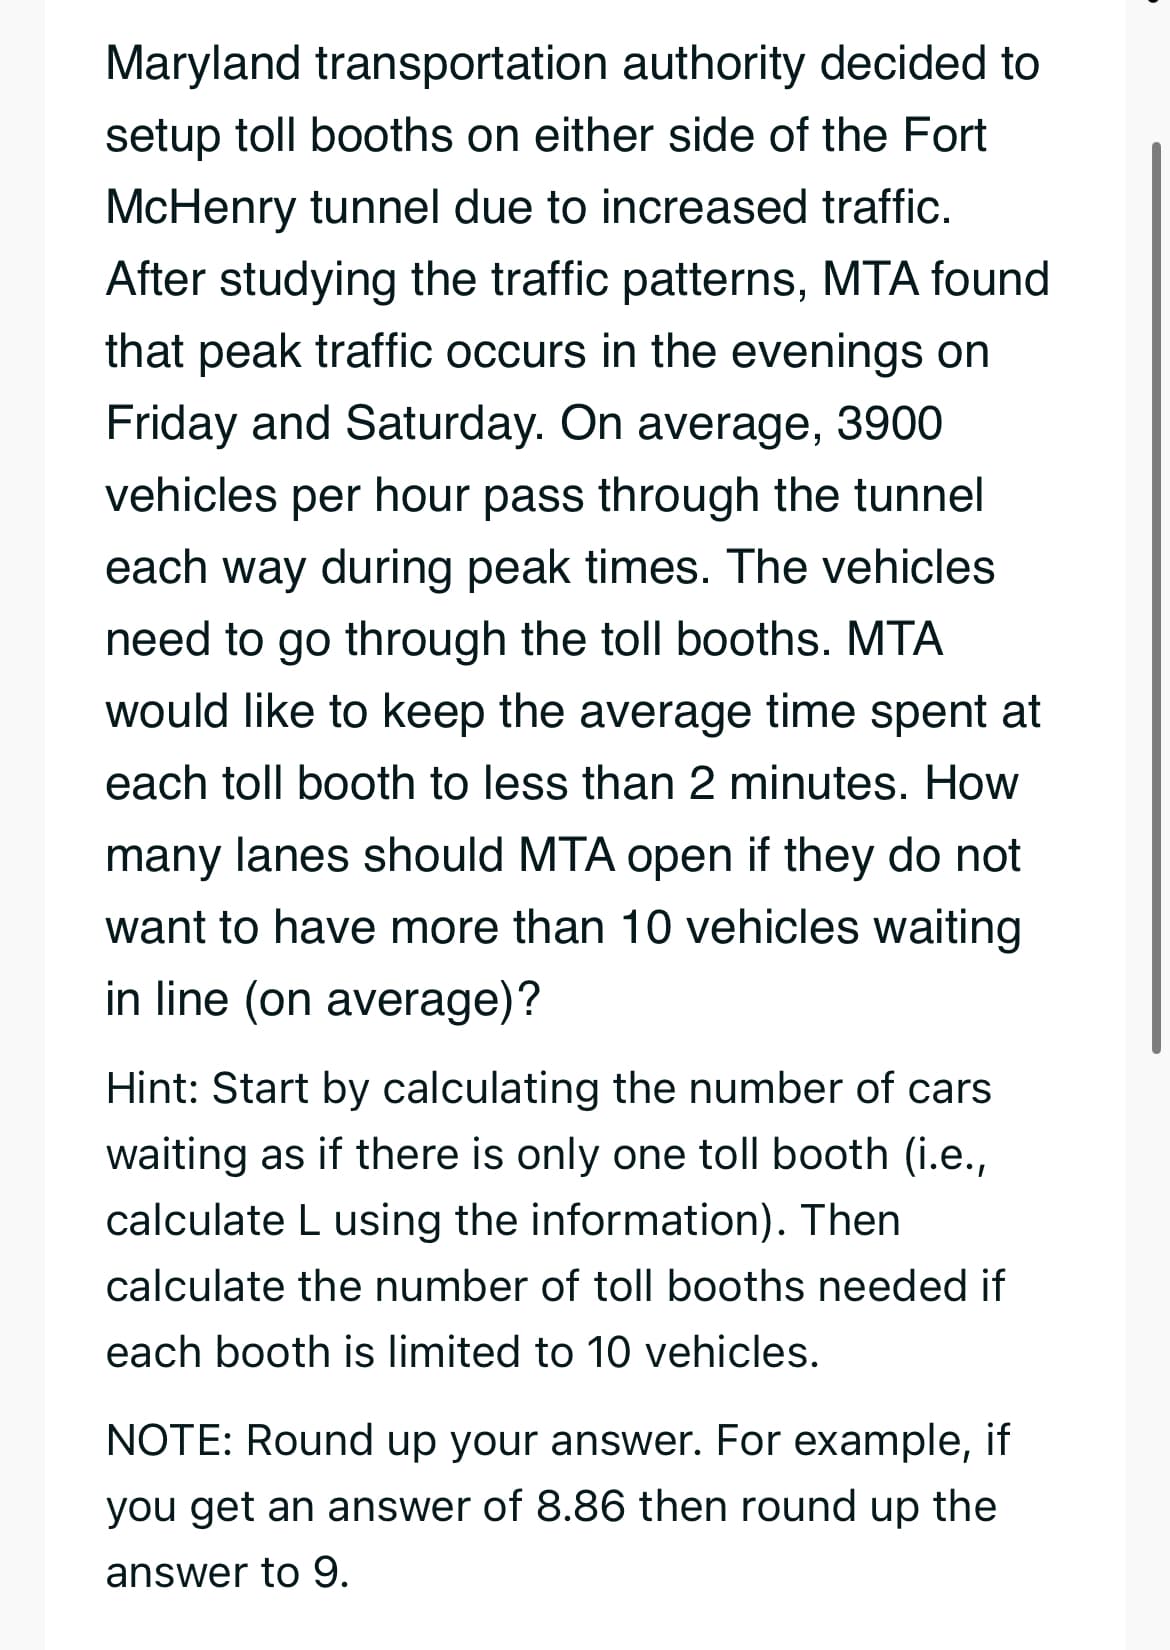 Maryland transportation authority decided to
setup toll booths on either side of the Fort
McHenry tunnel due to increased traffic.
After studying the traffic patterns, MTA found
that peak traffic occurs in the evenings on
Friday and Saturday. On average, 3900
vehicles per hour pass through the tunnel
each way during peak times. The vehicles
need to go through the toll booths. MTA
would like to keep the average time spent at
each toll booth to less than 2 minutes. How
many lanes should MTA open if they do not
want to have more than 10 vehicles waiting
in line (on average)?
Hint: Start by calculating the number of cars
waiting as if there is only one toll booth (i.e.,
calculate L using the information). Then
calculate the number of toll booths needed if
each booth is limited to 10 vehicles.
NOTE: Round up your answer. For example, if
you get an answer of 8.86 then round up the
answer to 9.